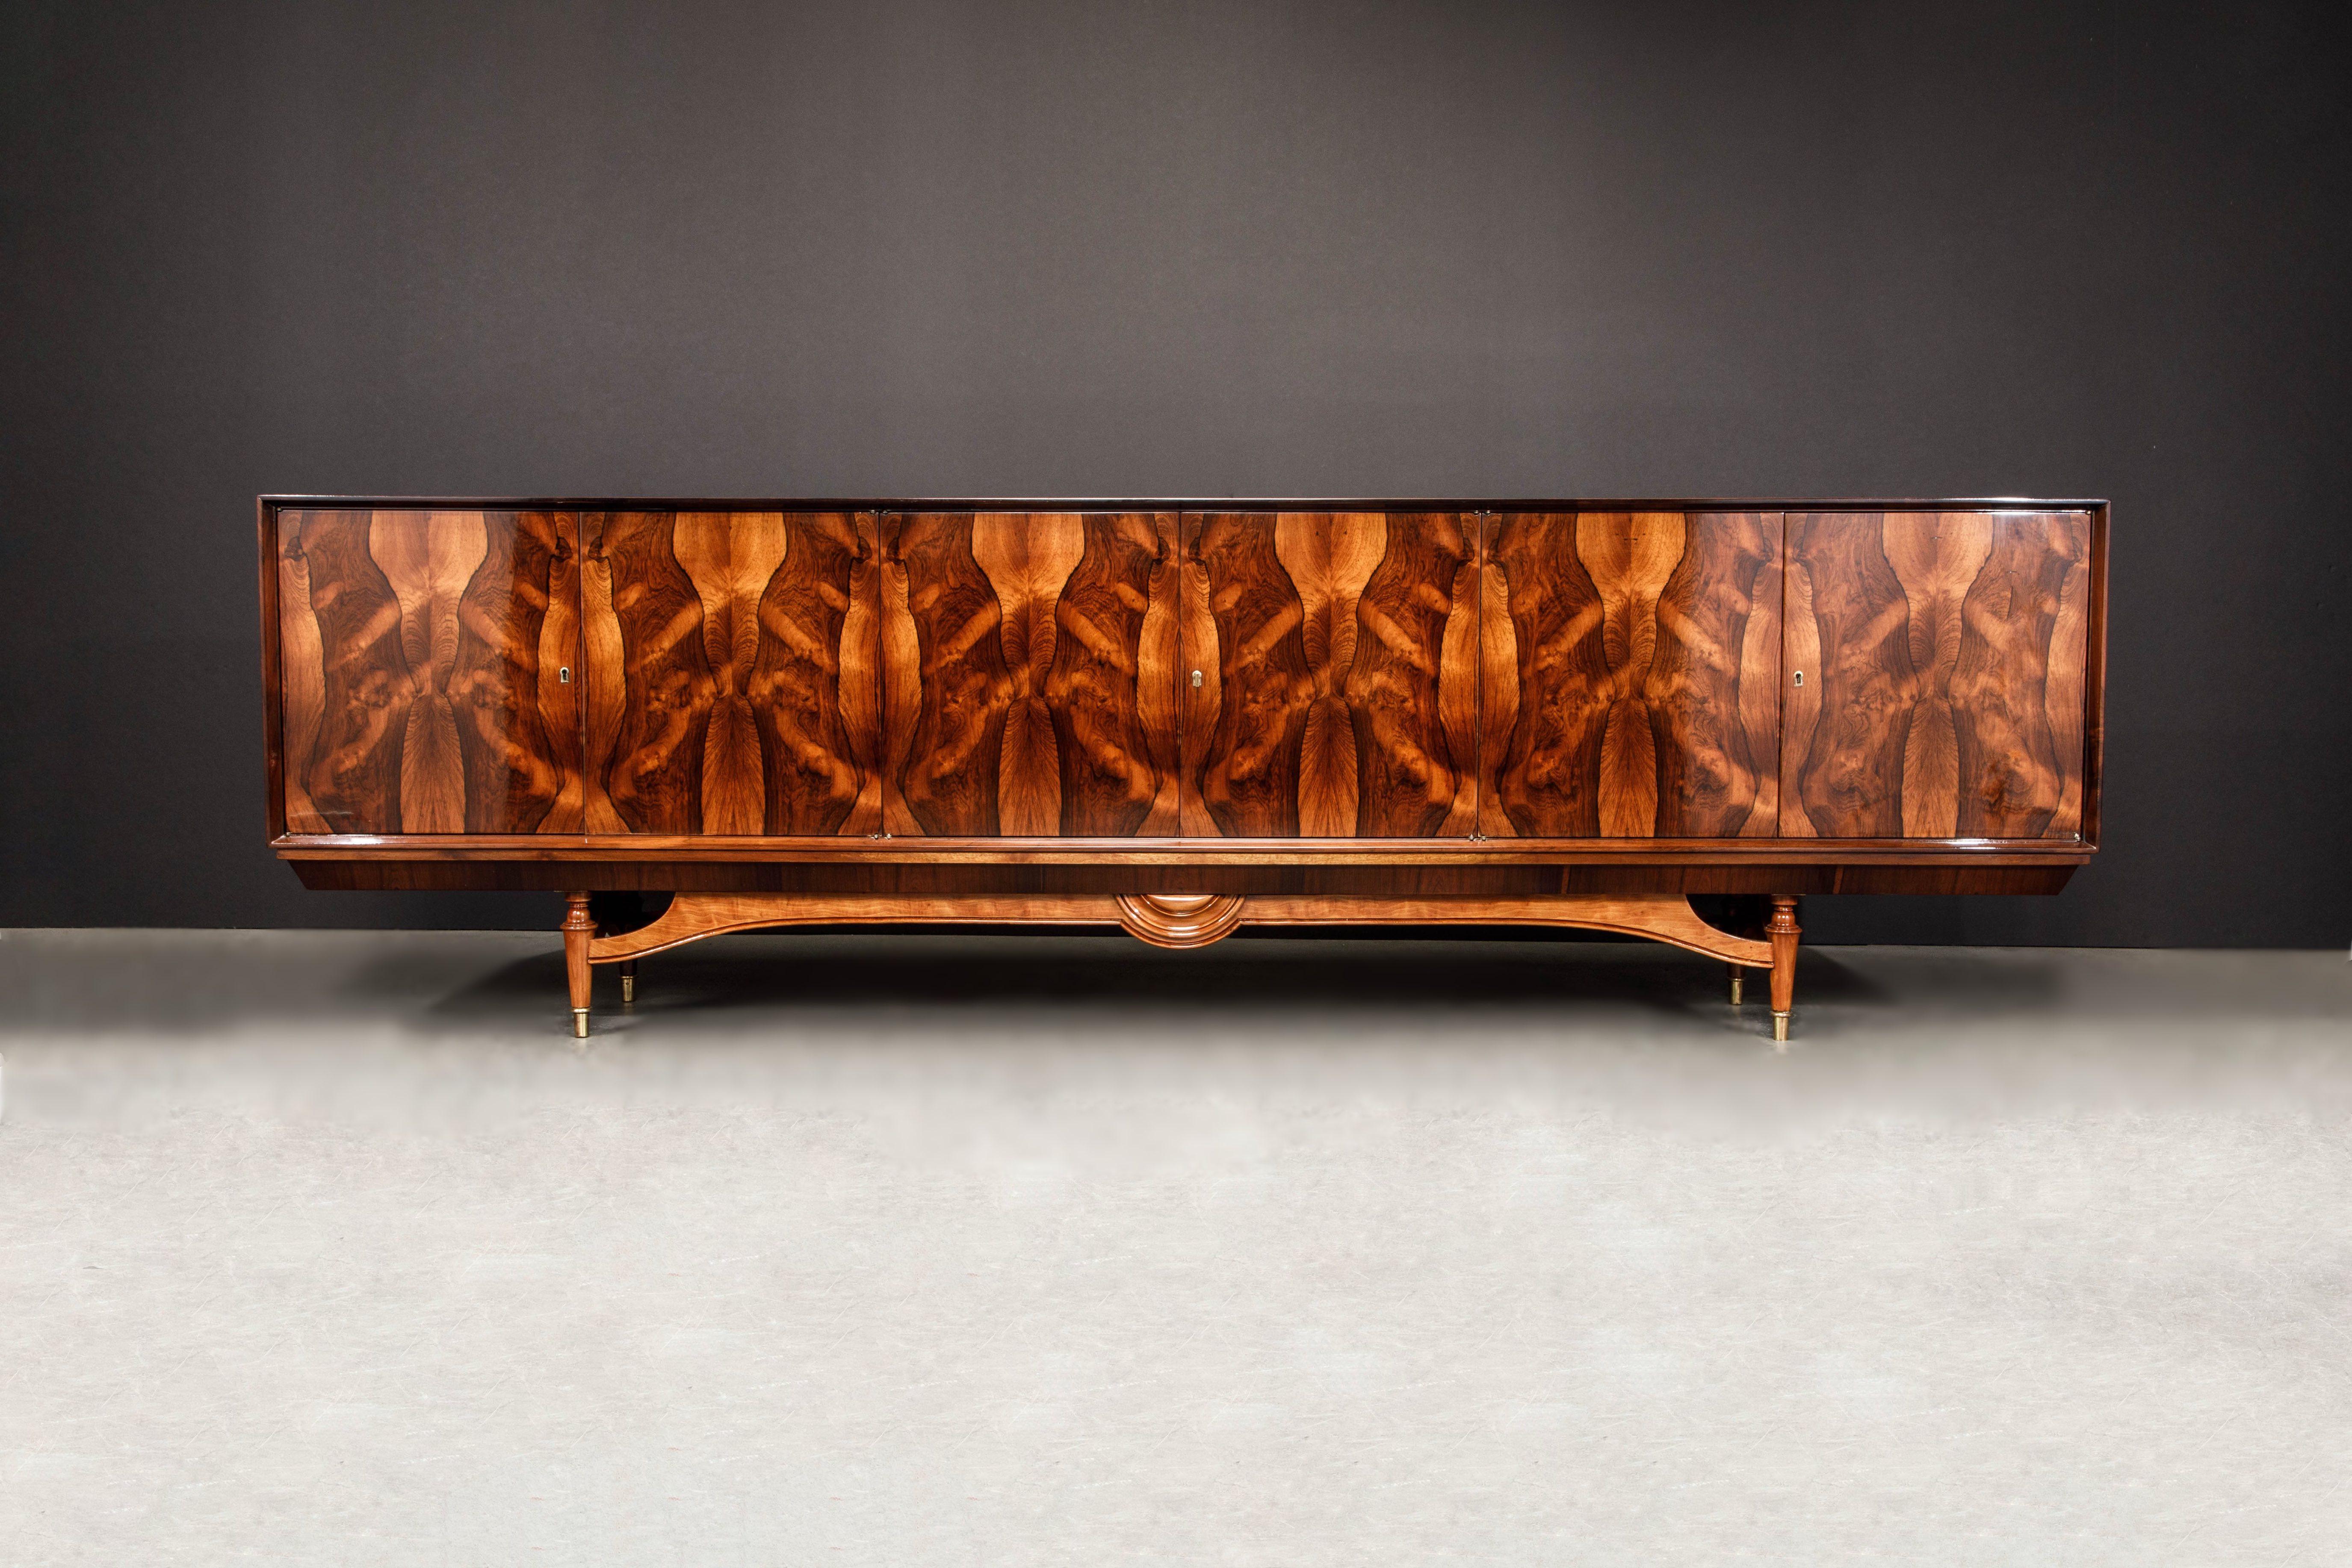 A breathtaking and (very) exotic sideboard credenza attributed to Giuseppe Scapinelli, crafted in 1950s Brazil. This showstopper will take center stage of any room with its six book-matched Brazilian Rosewood doors which have an exotic butterfly